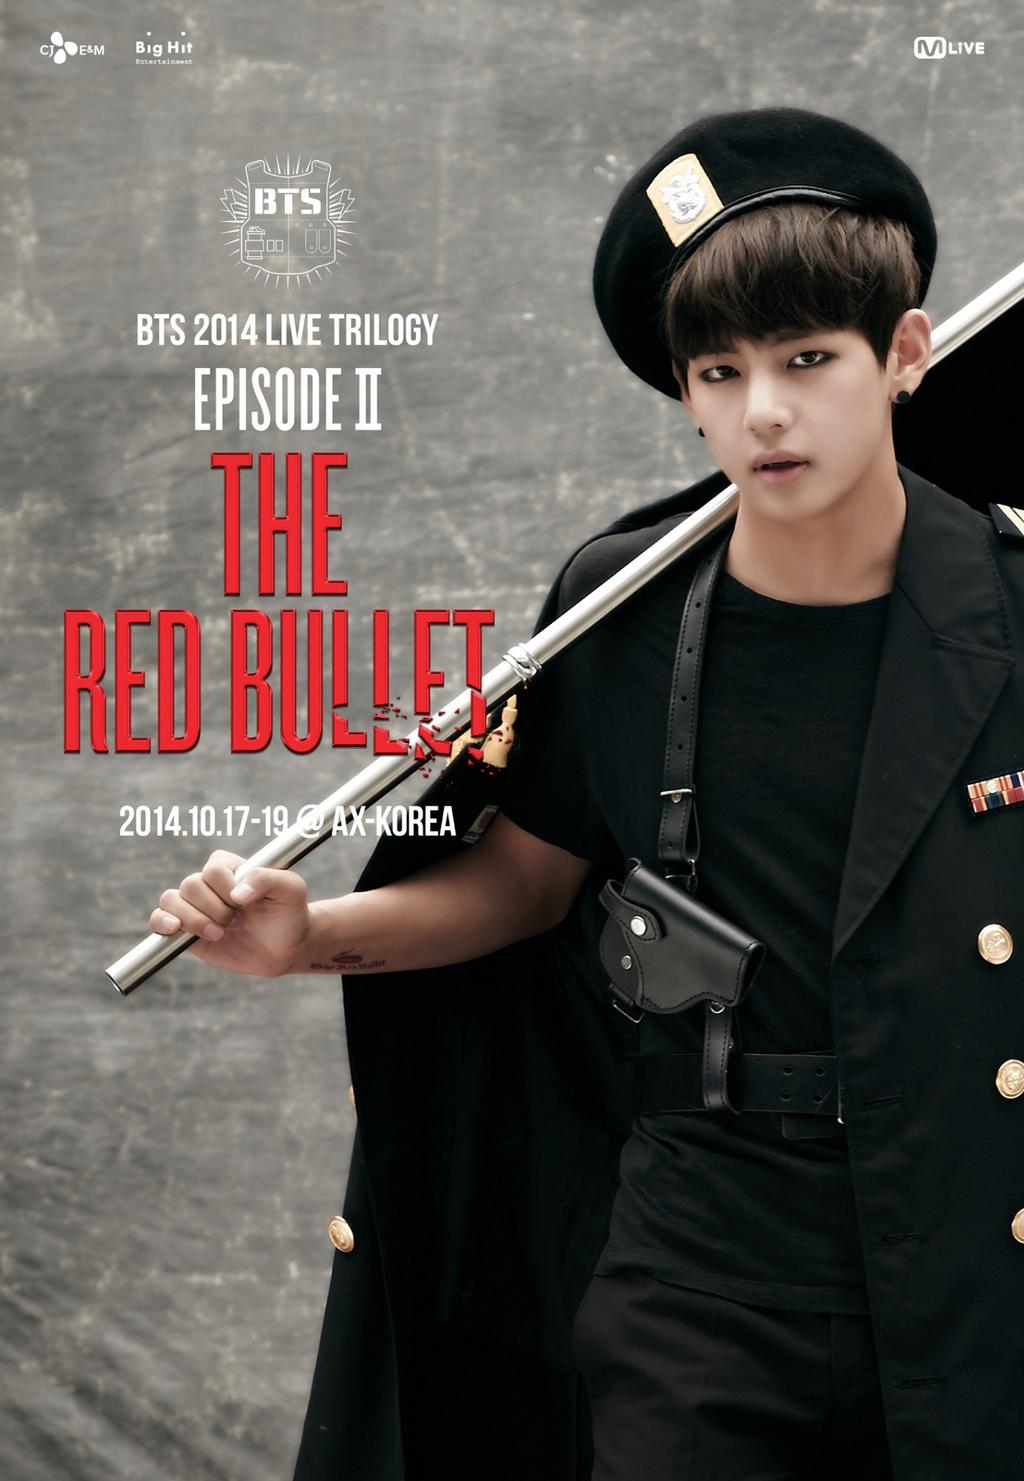 M2lop9v - Bts The Red Bullet Photoshoot - HD Wallpaper 